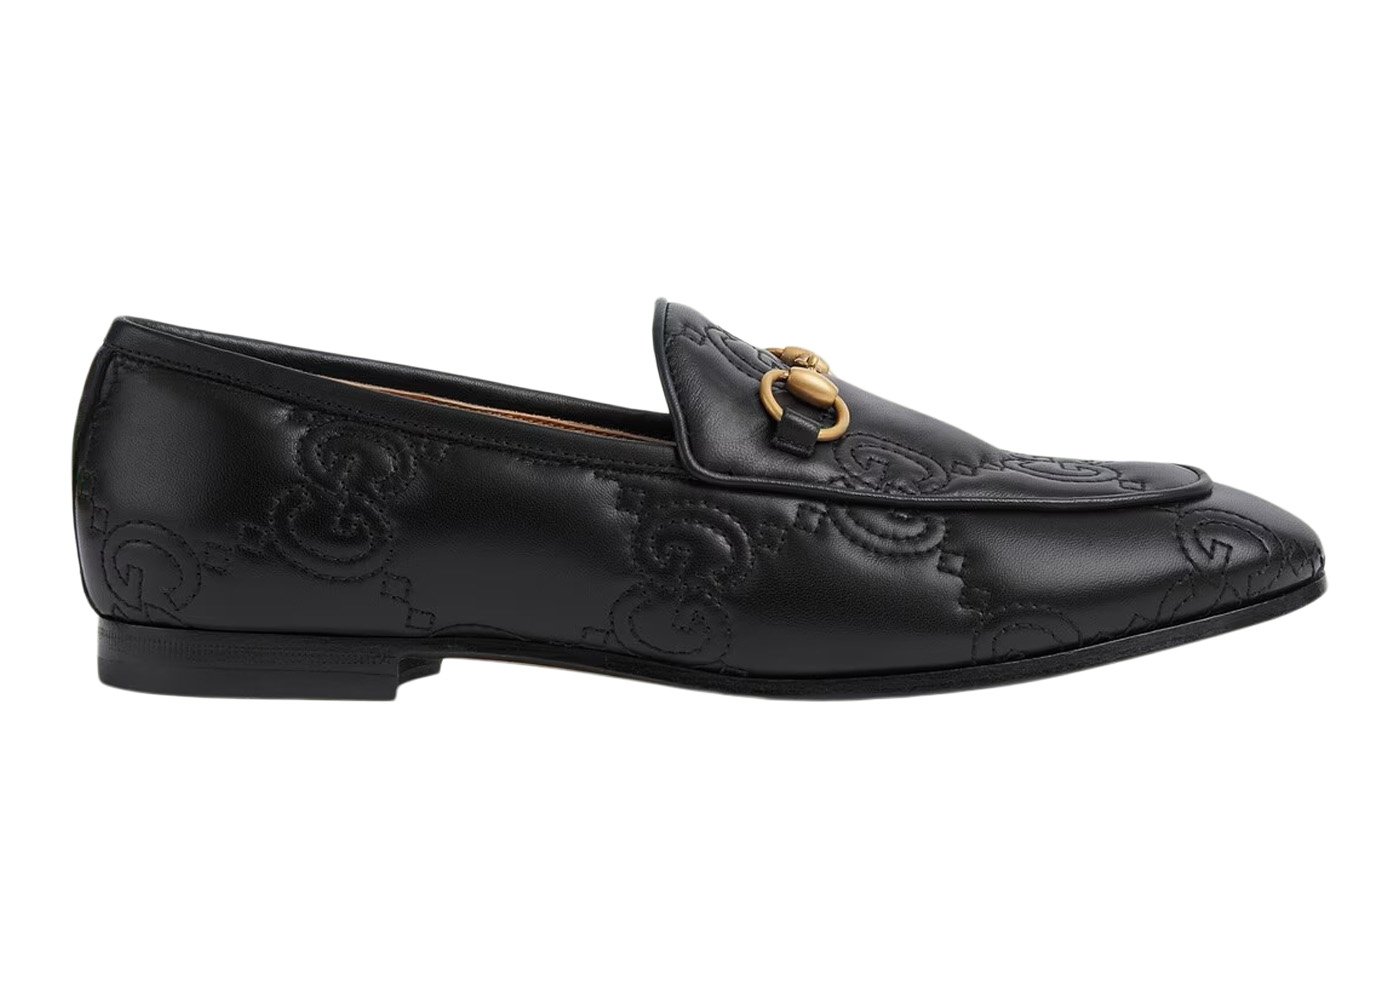 Gucci Jordaan Loafer Black GG Leather sneakers